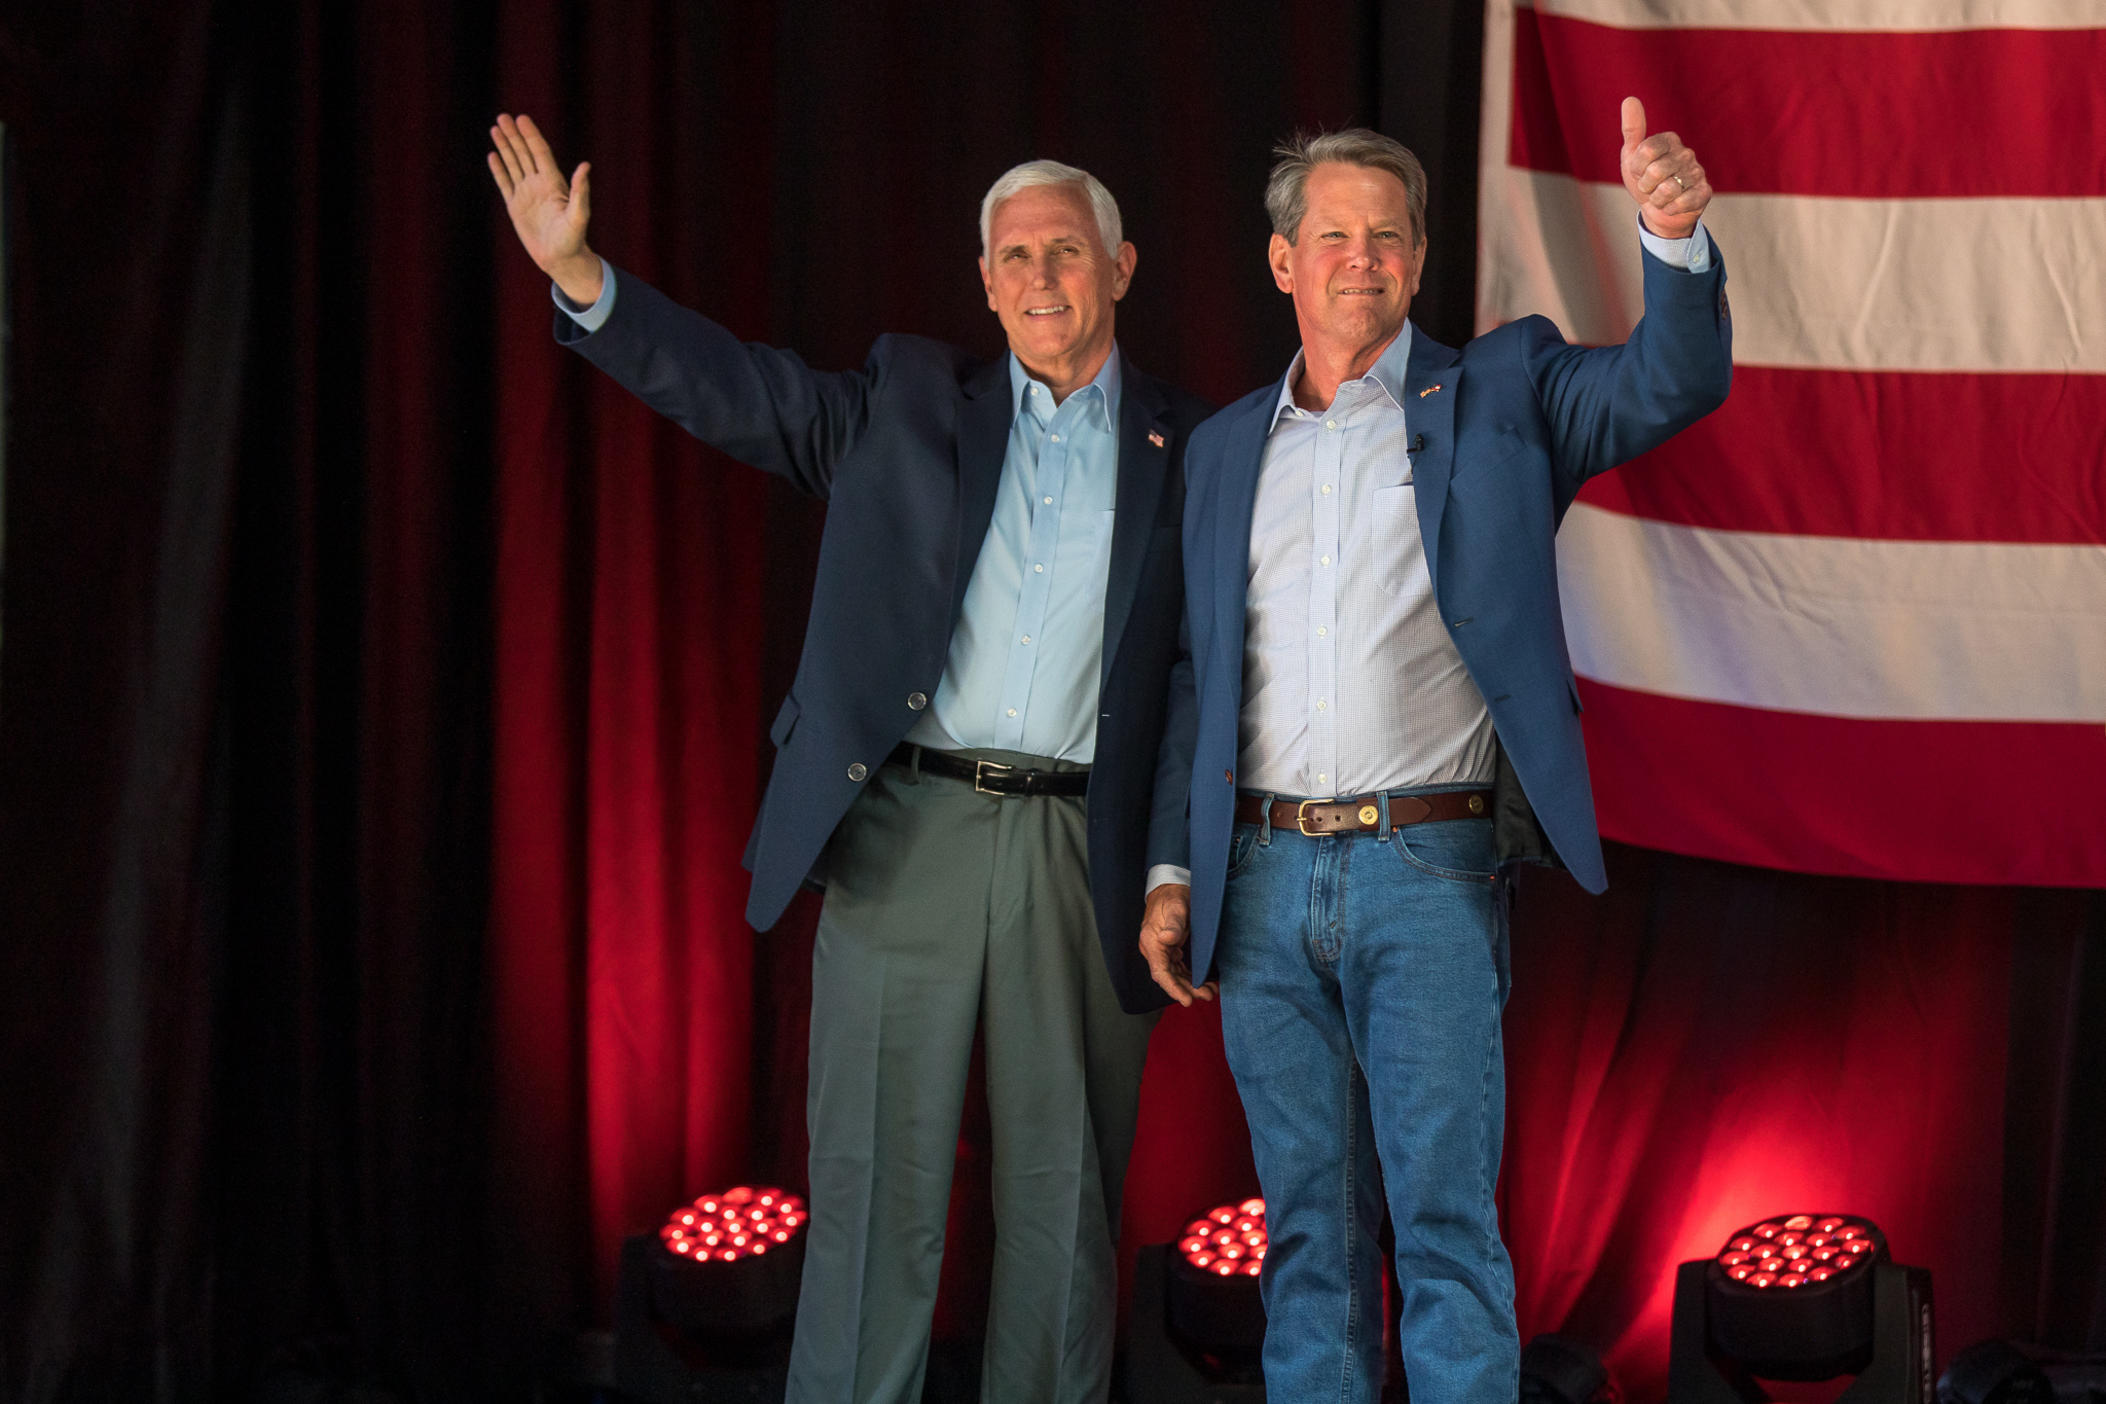 Former Vice President Mike Pence rallied for Gov. Brian Kemp Monday, May 23 in Cobb County.